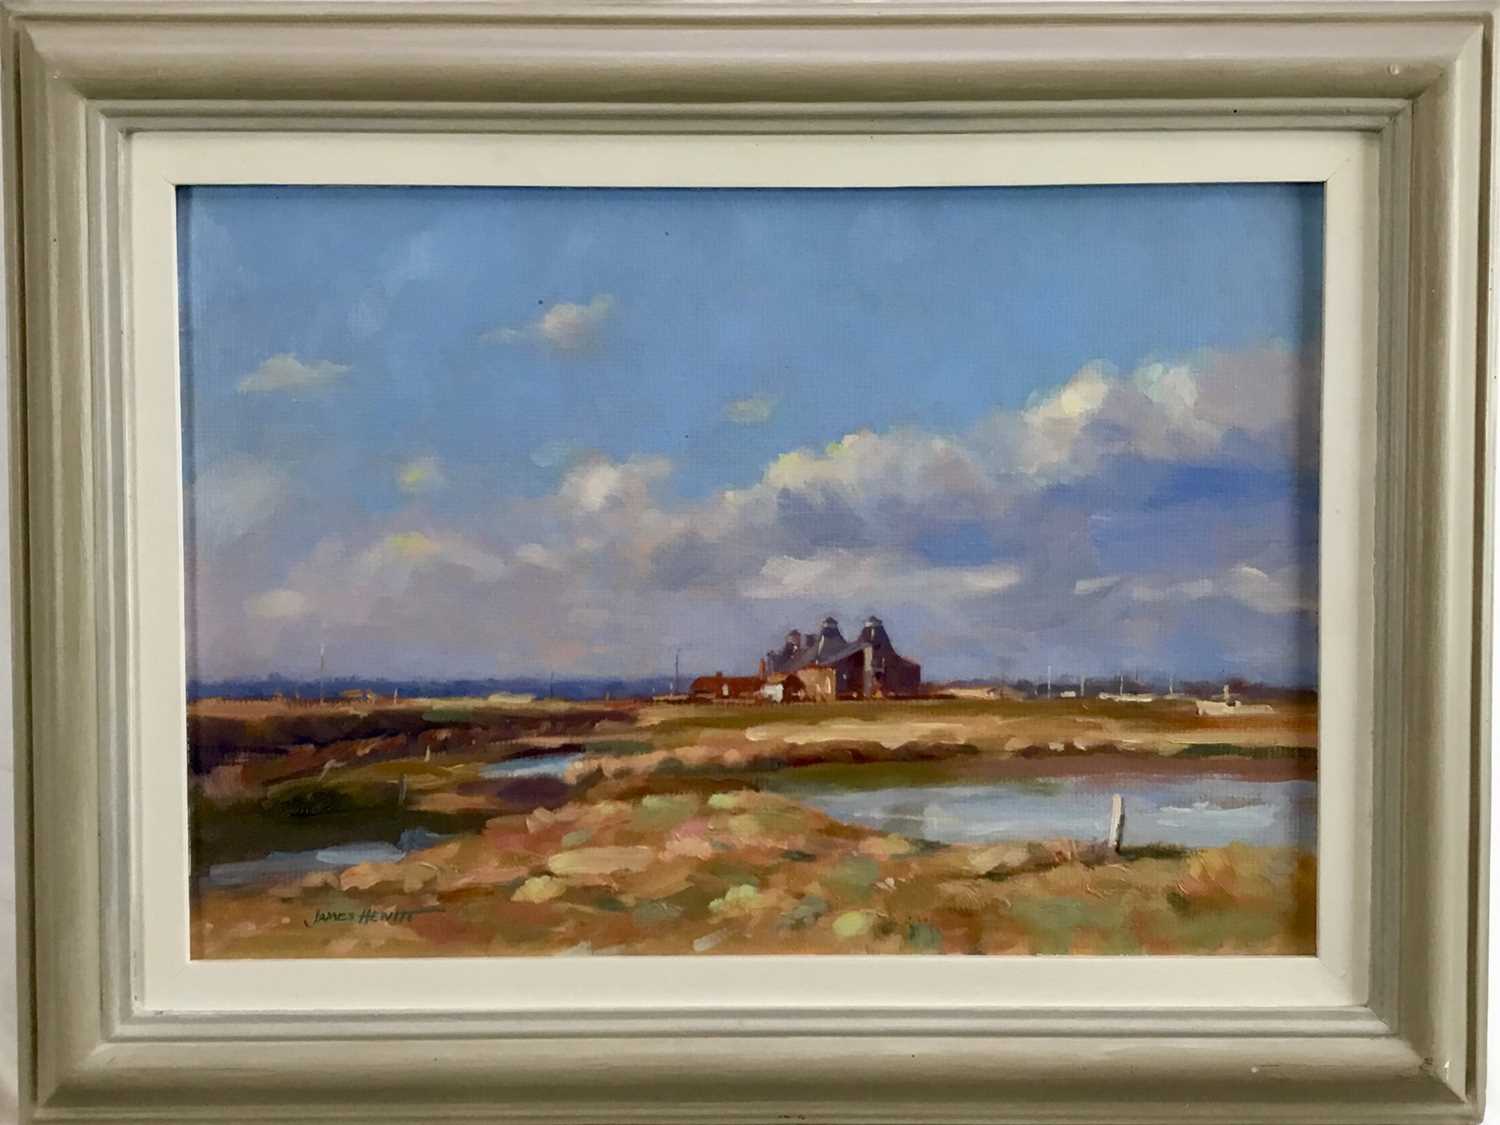 Lot 32 - James Hewitt (b. 1934) oil on board - 'Saltcote Mill - Past', signed lower left, titled and dated 2011 verso, 43cm x 29cm, framed